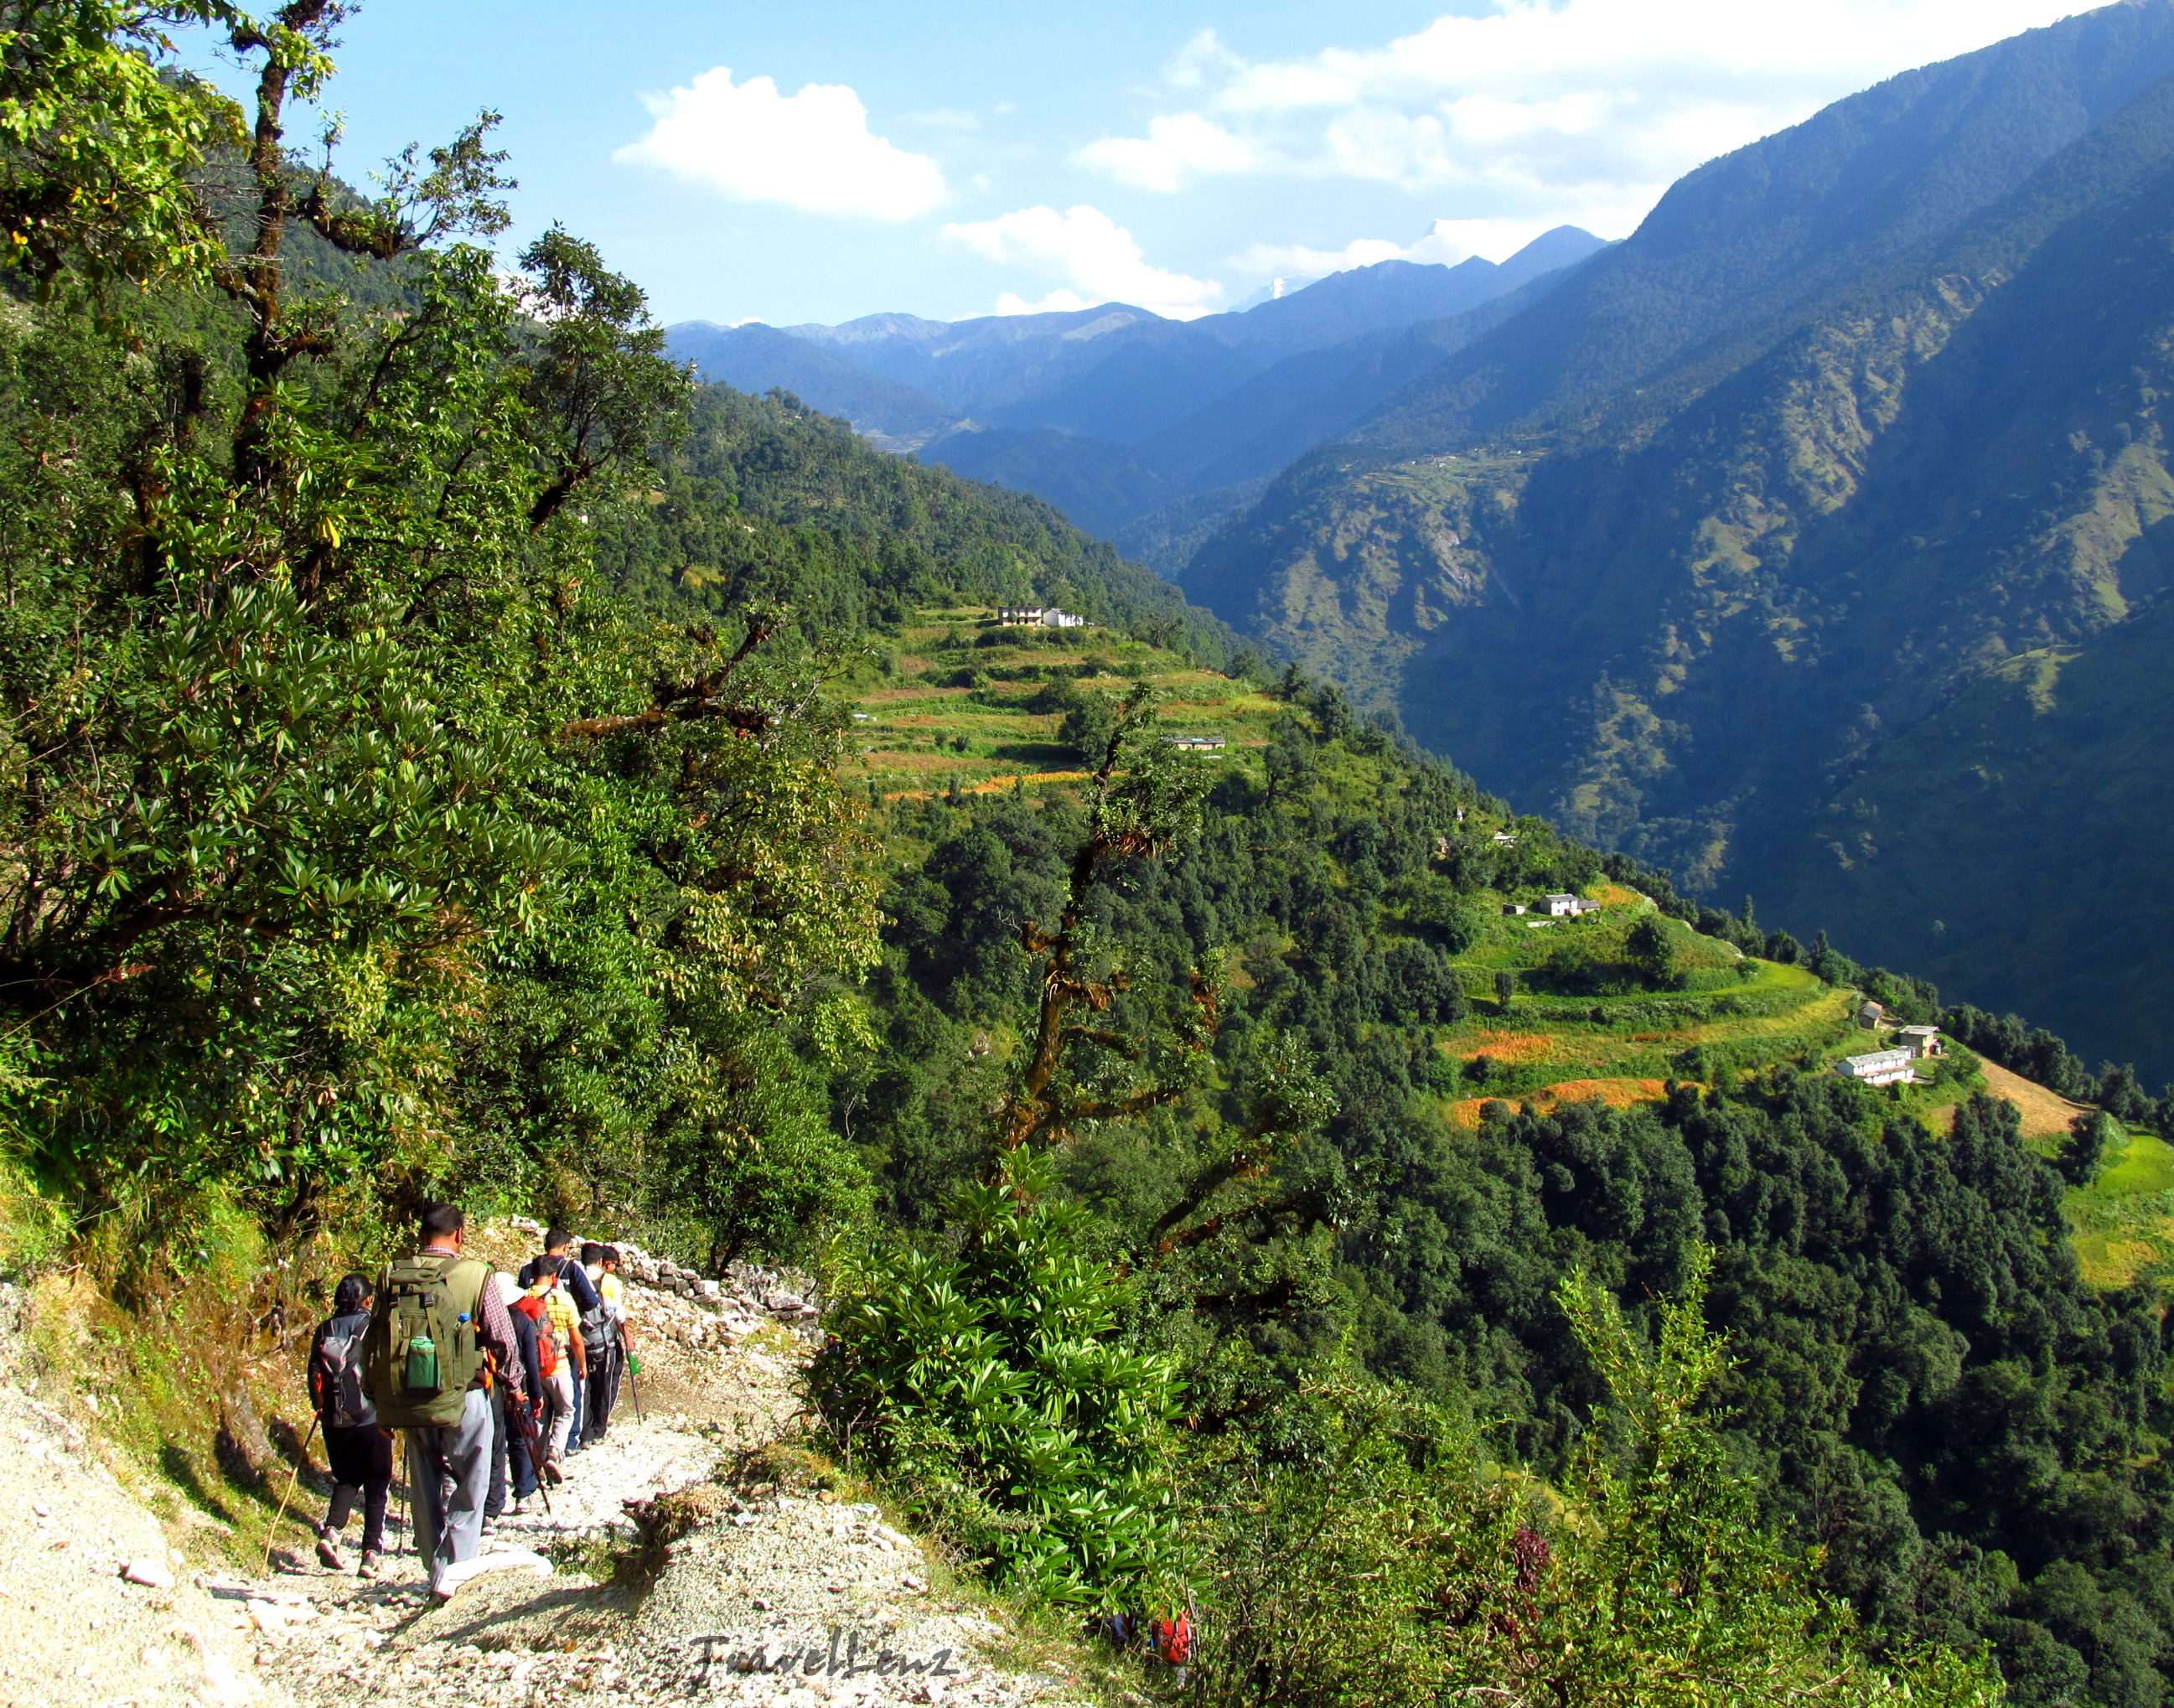 Trekkers walking through the countryside with mountains and terrace fields in the backdrop